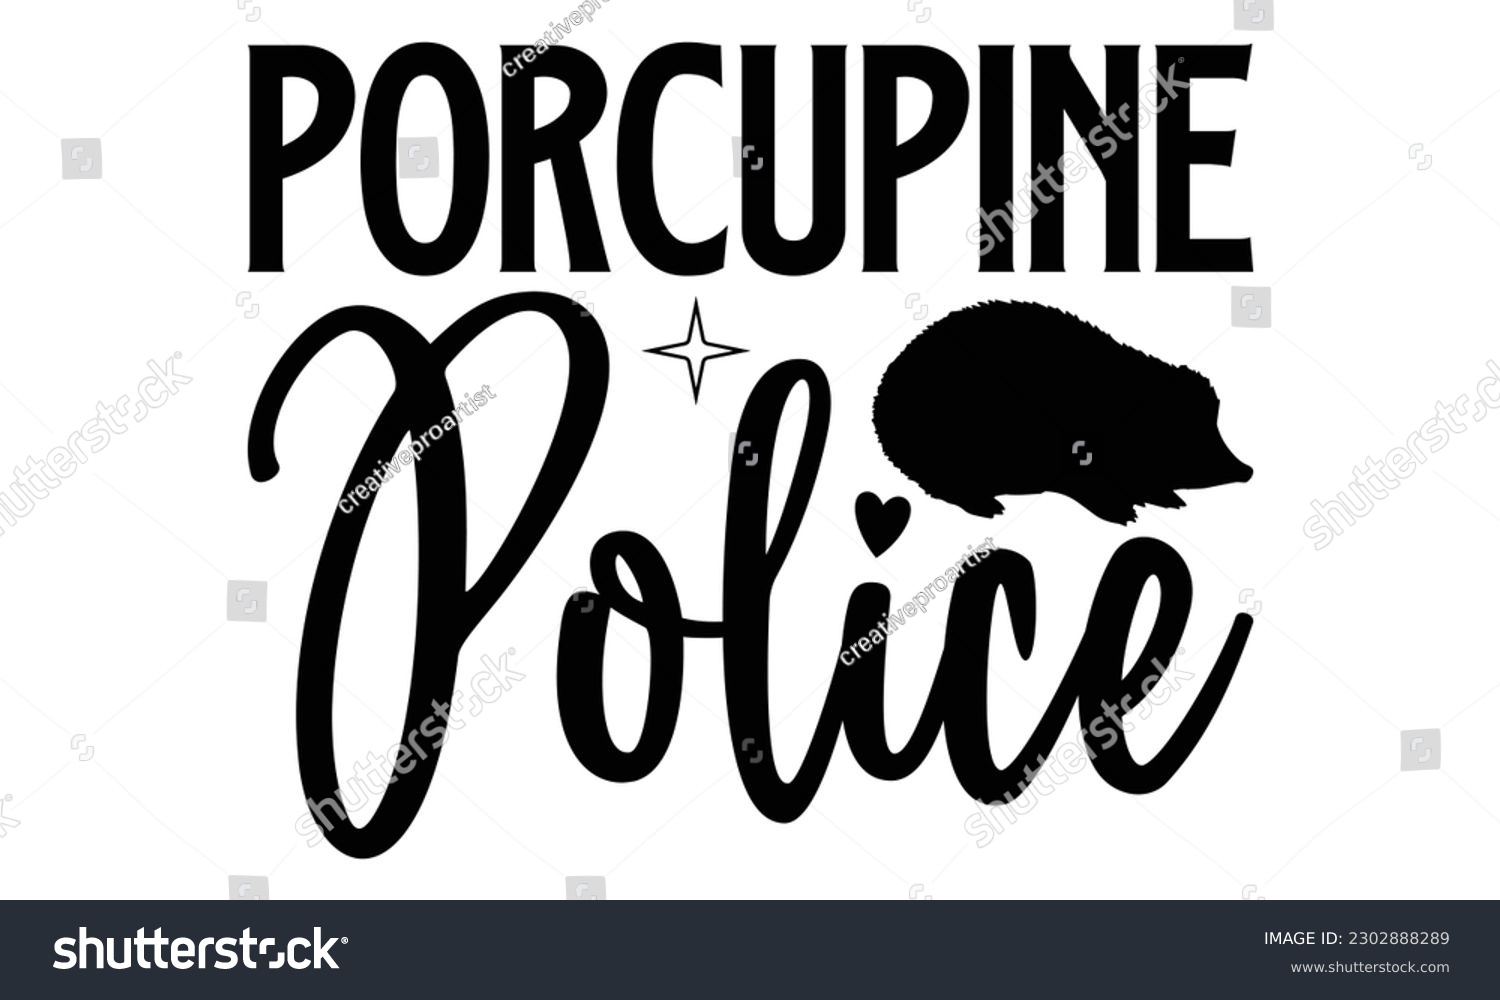 SVG of Porcupine Police- Porcupine t- shirt design, Hand drawn lettering phrase Vector illustration Template, Isolated on white background, eps, svg Files for Cutting svg